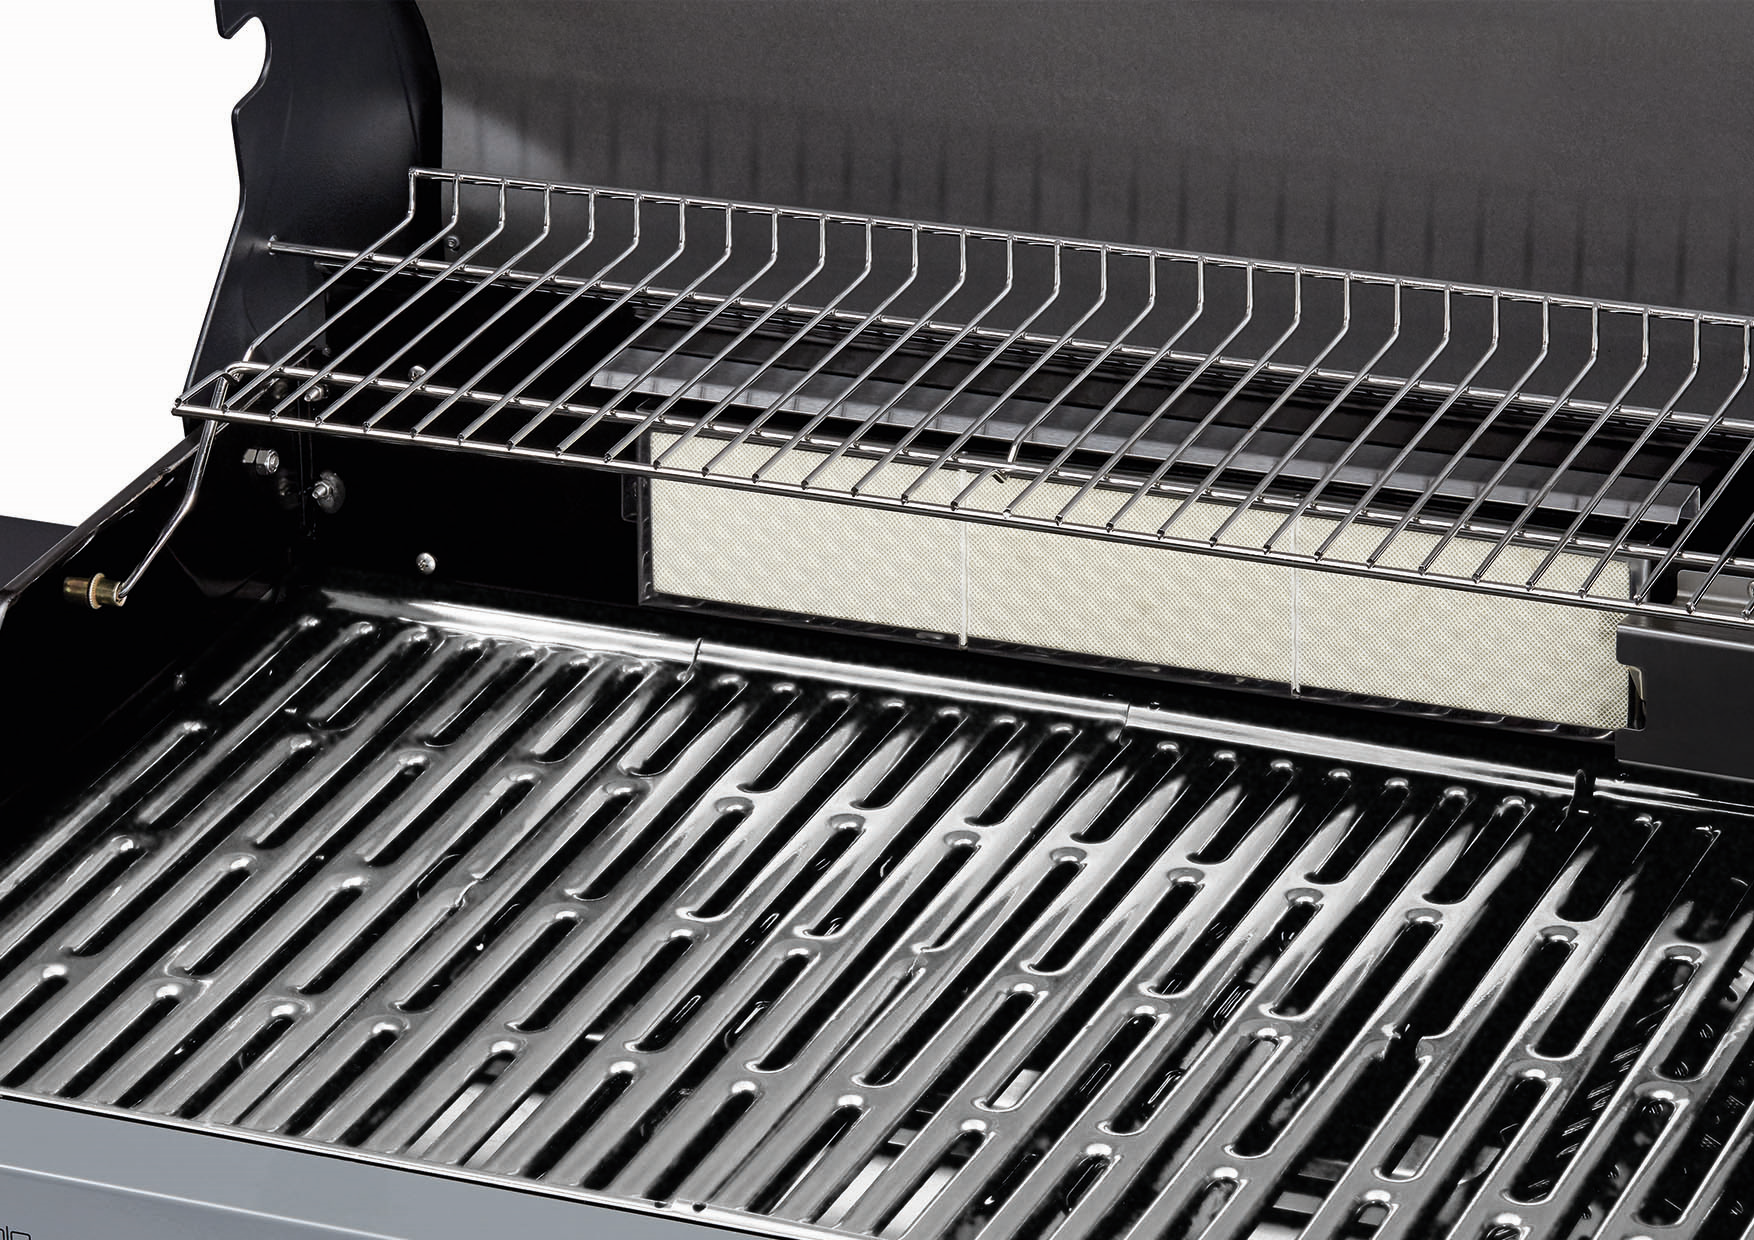 Gasgrill 'Boston Black 2 Turbo' 2 Brenner schwarz + product picture